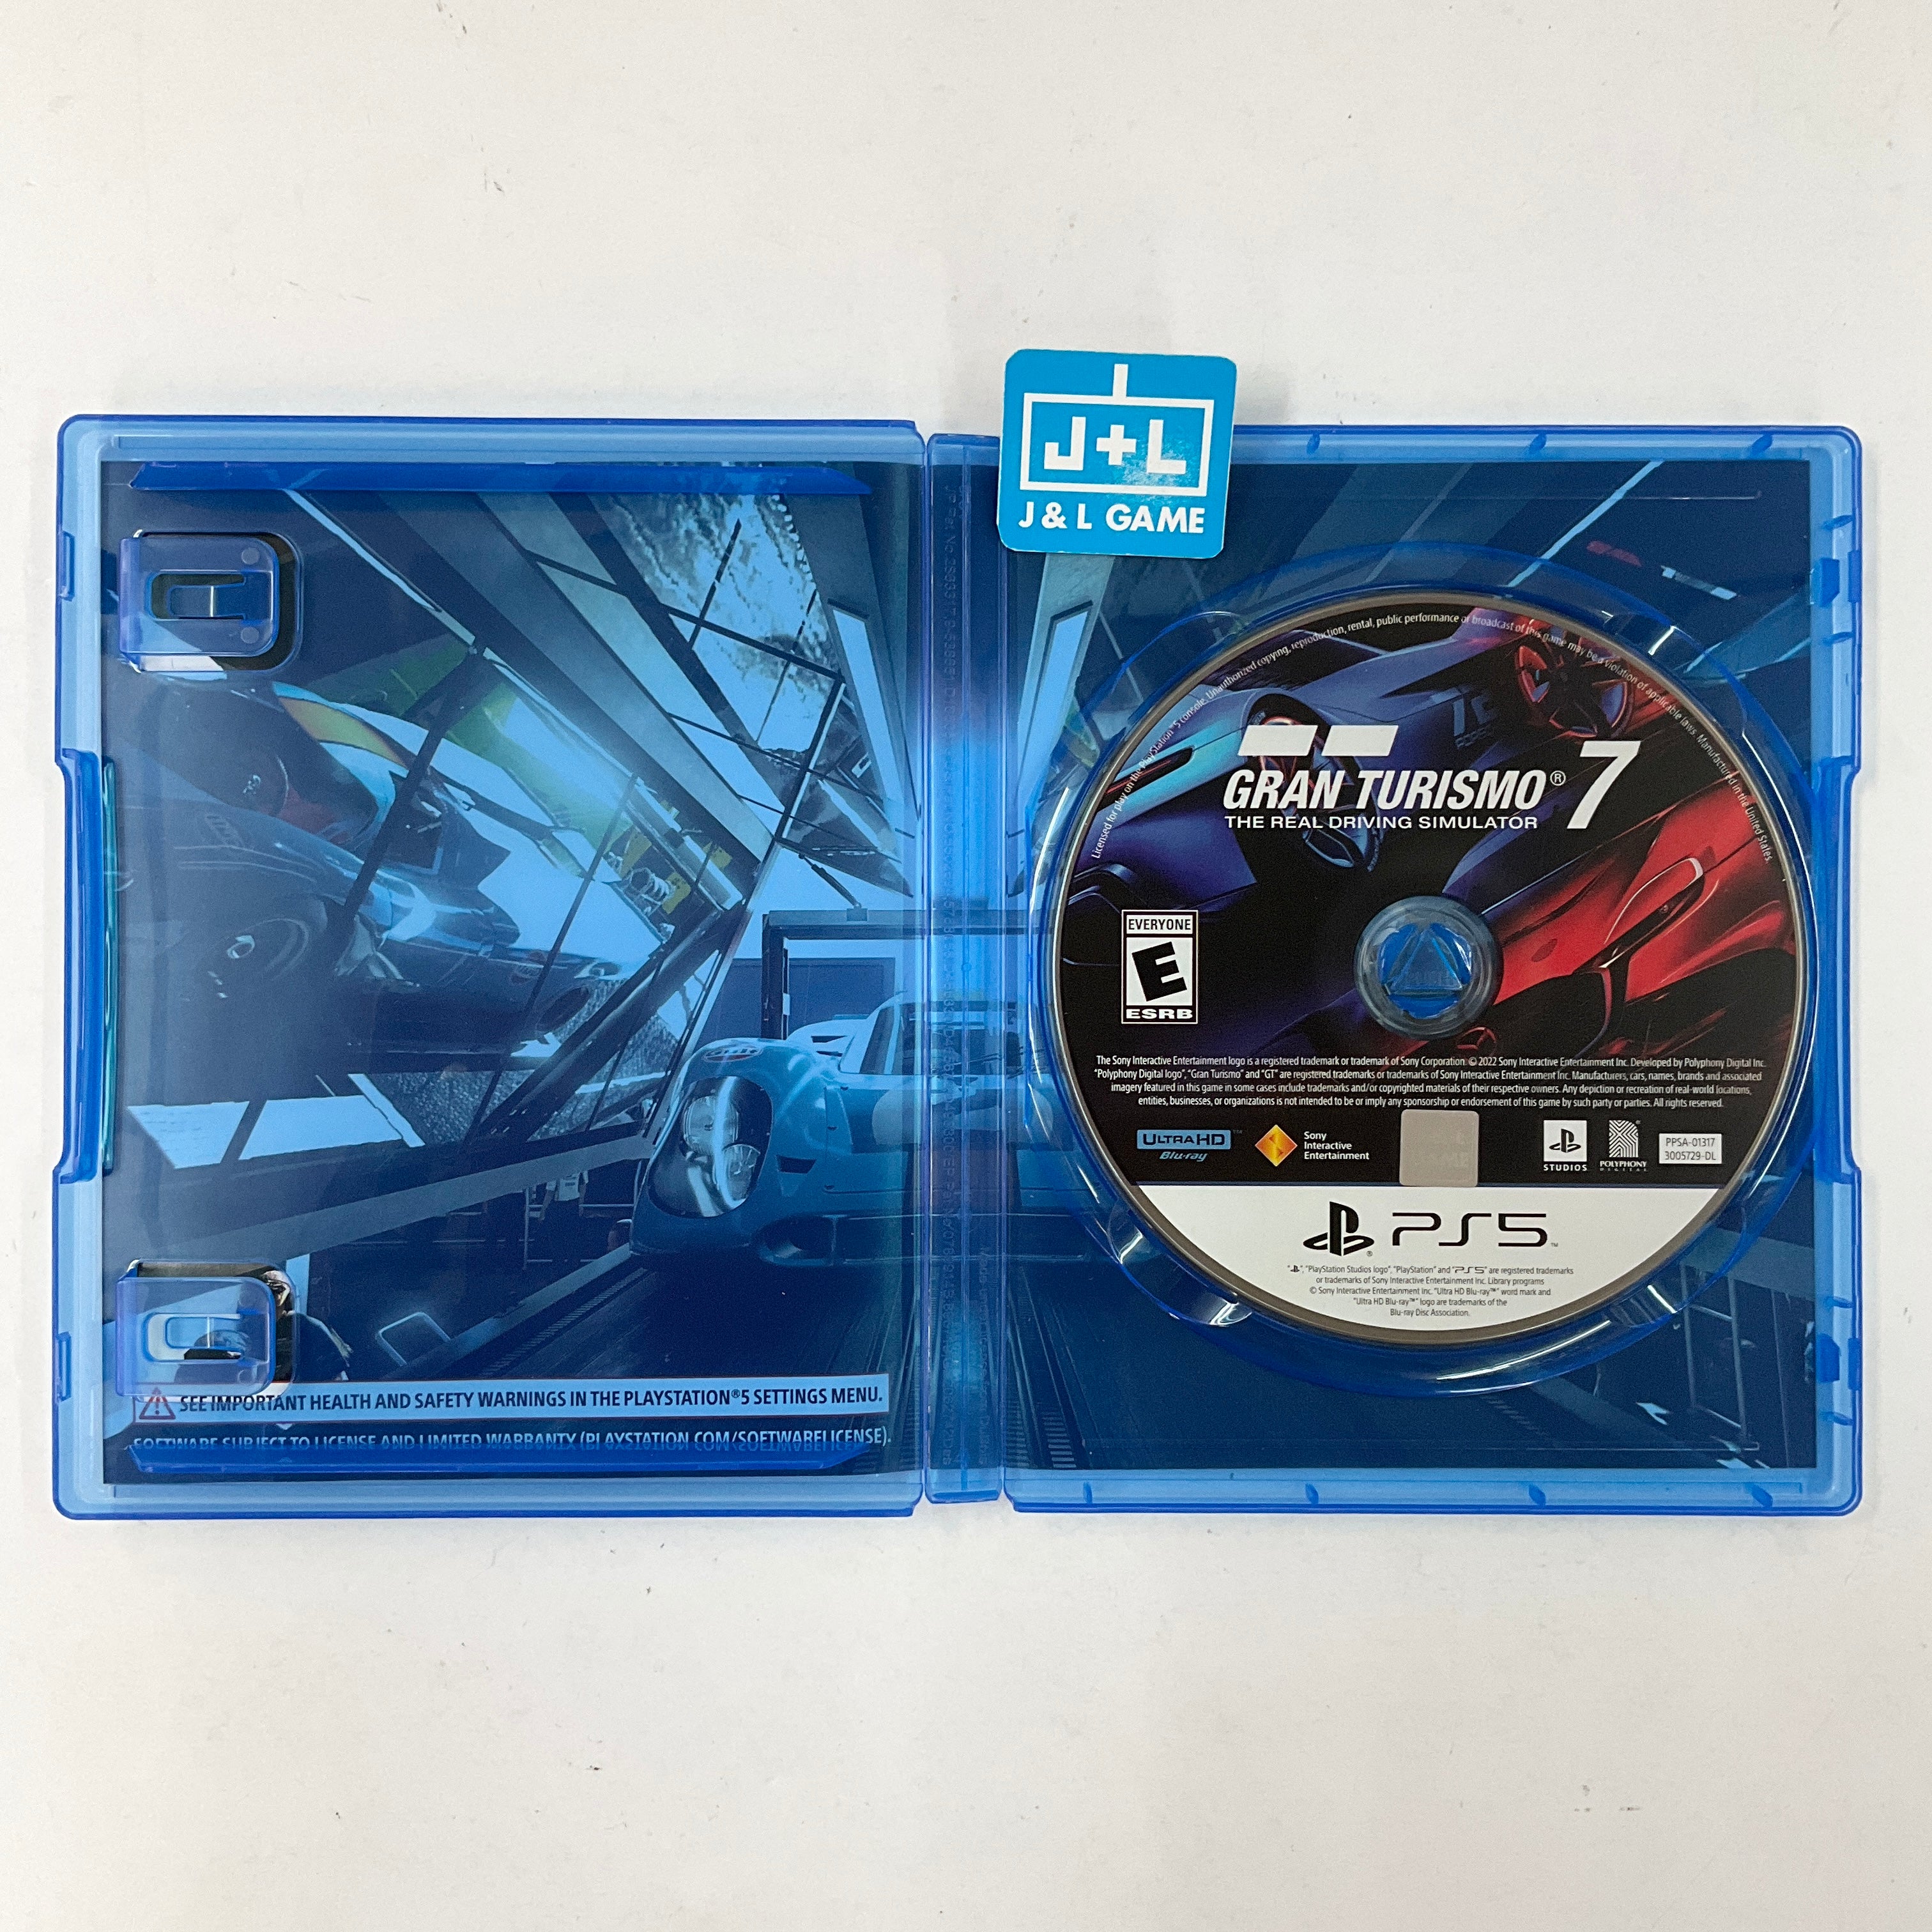 Gran Turismo 7 - (PS5) PlayStation 5 [Pre-Owned] Video Games PlayStation Studios   